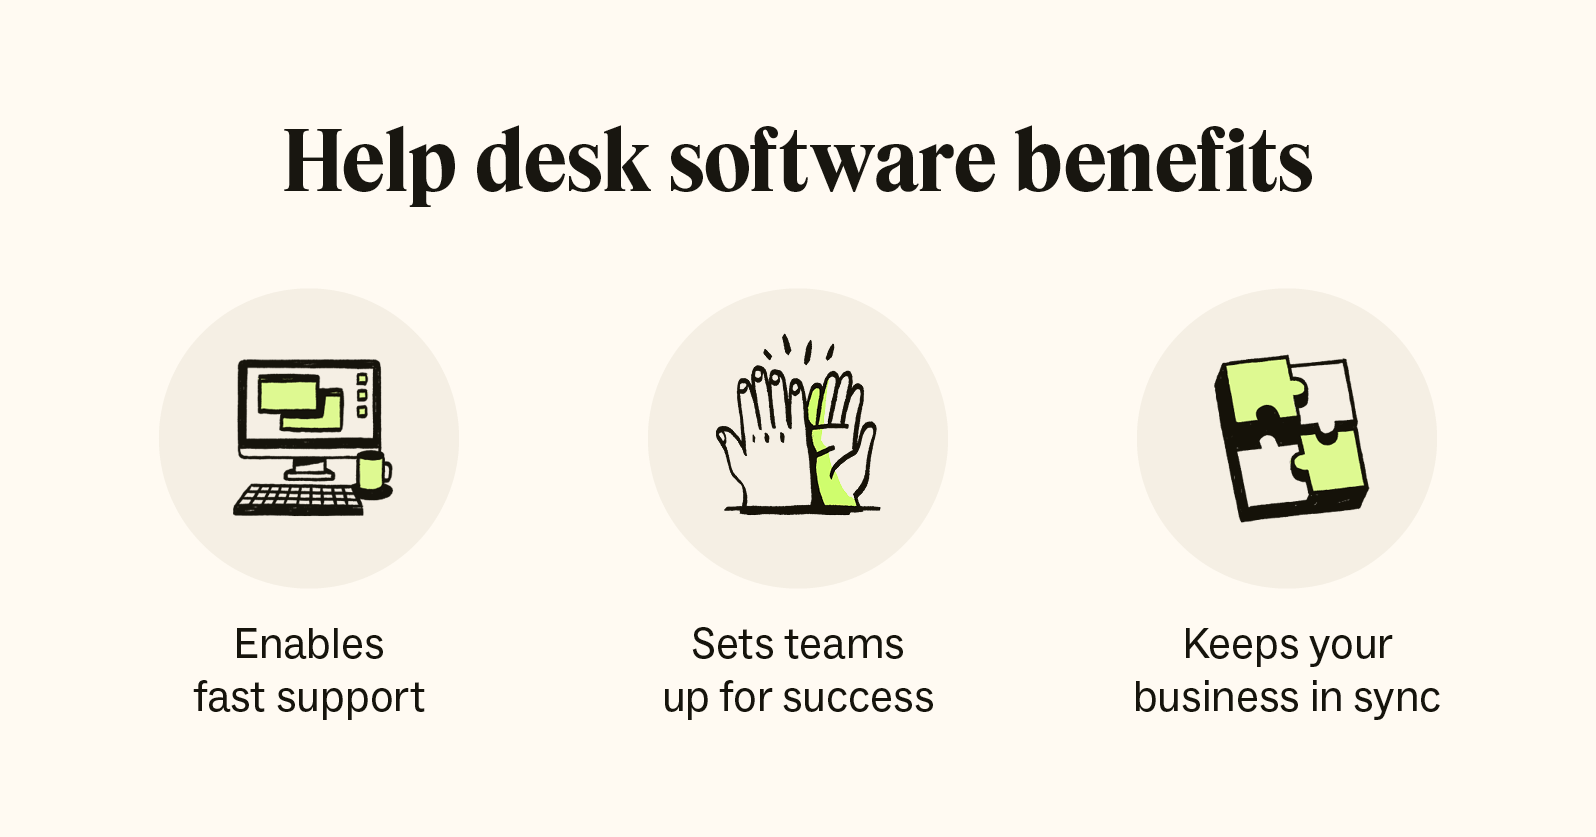 An image depicts three icons with text explaining the benefits of help desk software.